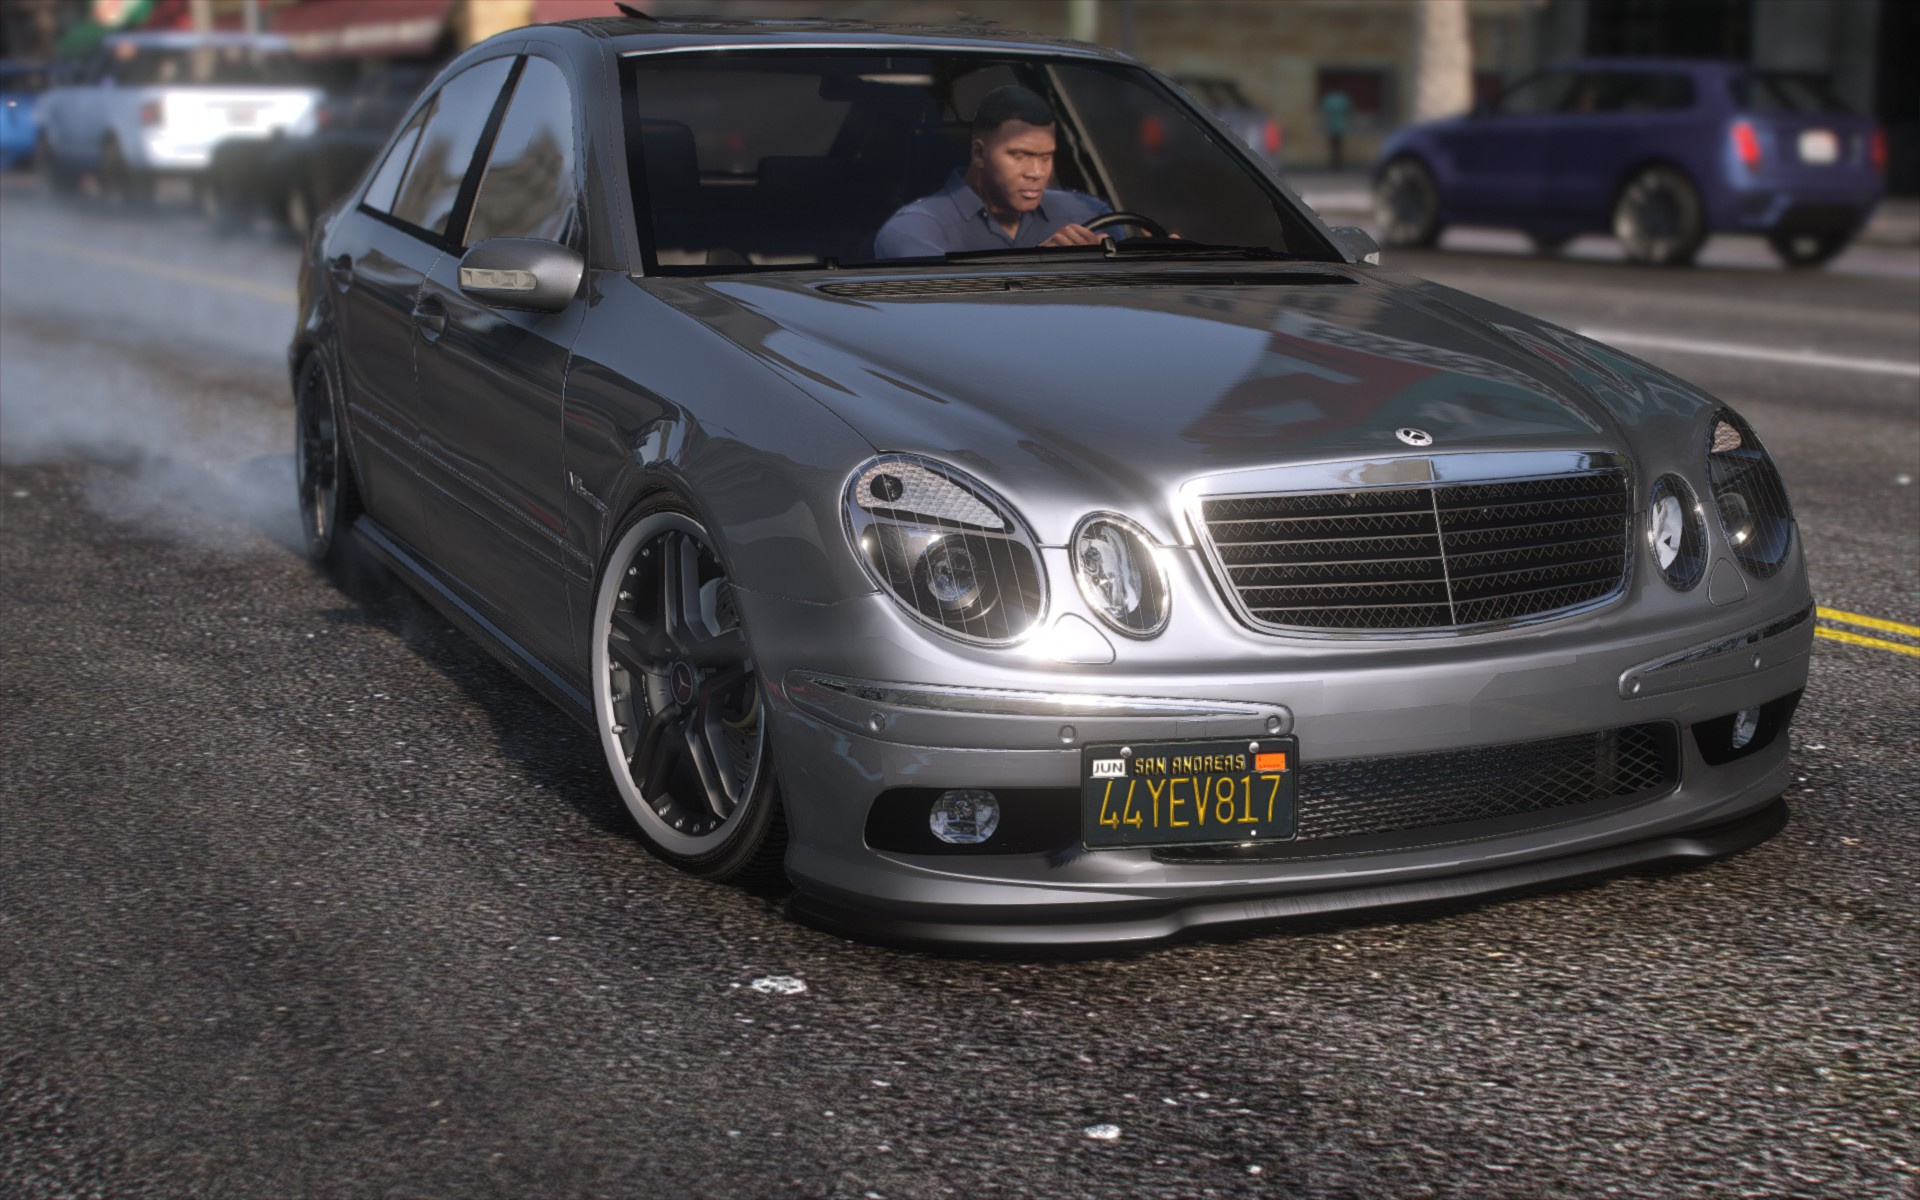 https://img.gta5-mods.com/q95/images/mercedes-benz-e55-amg-add-on-replace-tuning-realistic-sound-handling/fdda26-20230712205115_1.jpg